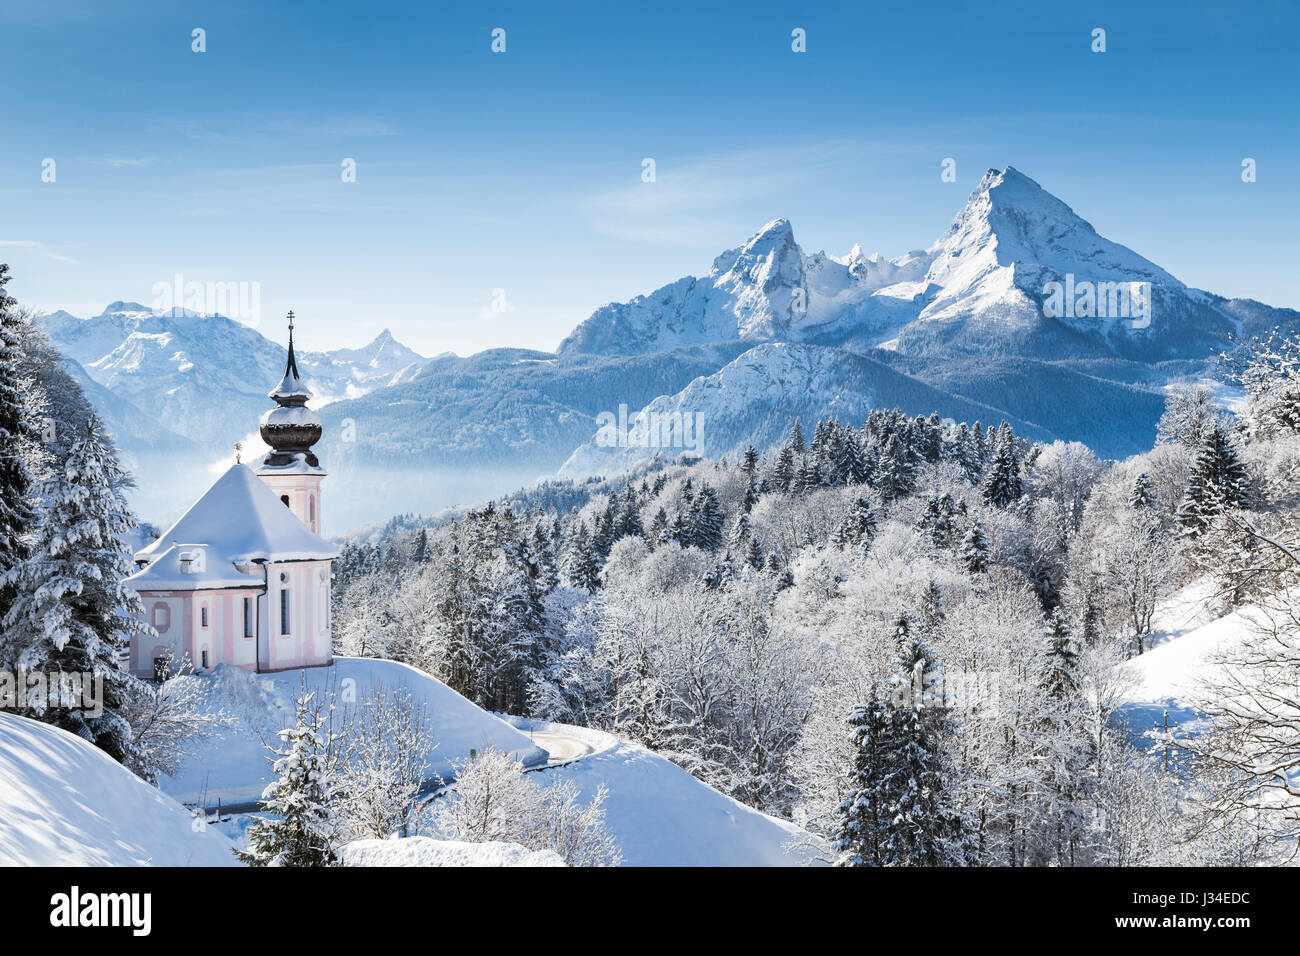 Panoramic view of beautiful winter wonderland mountain scenery in the Alps with pilgrimage church of Maria Gern and famous Katzmann summit, Bavaria Stock Photo